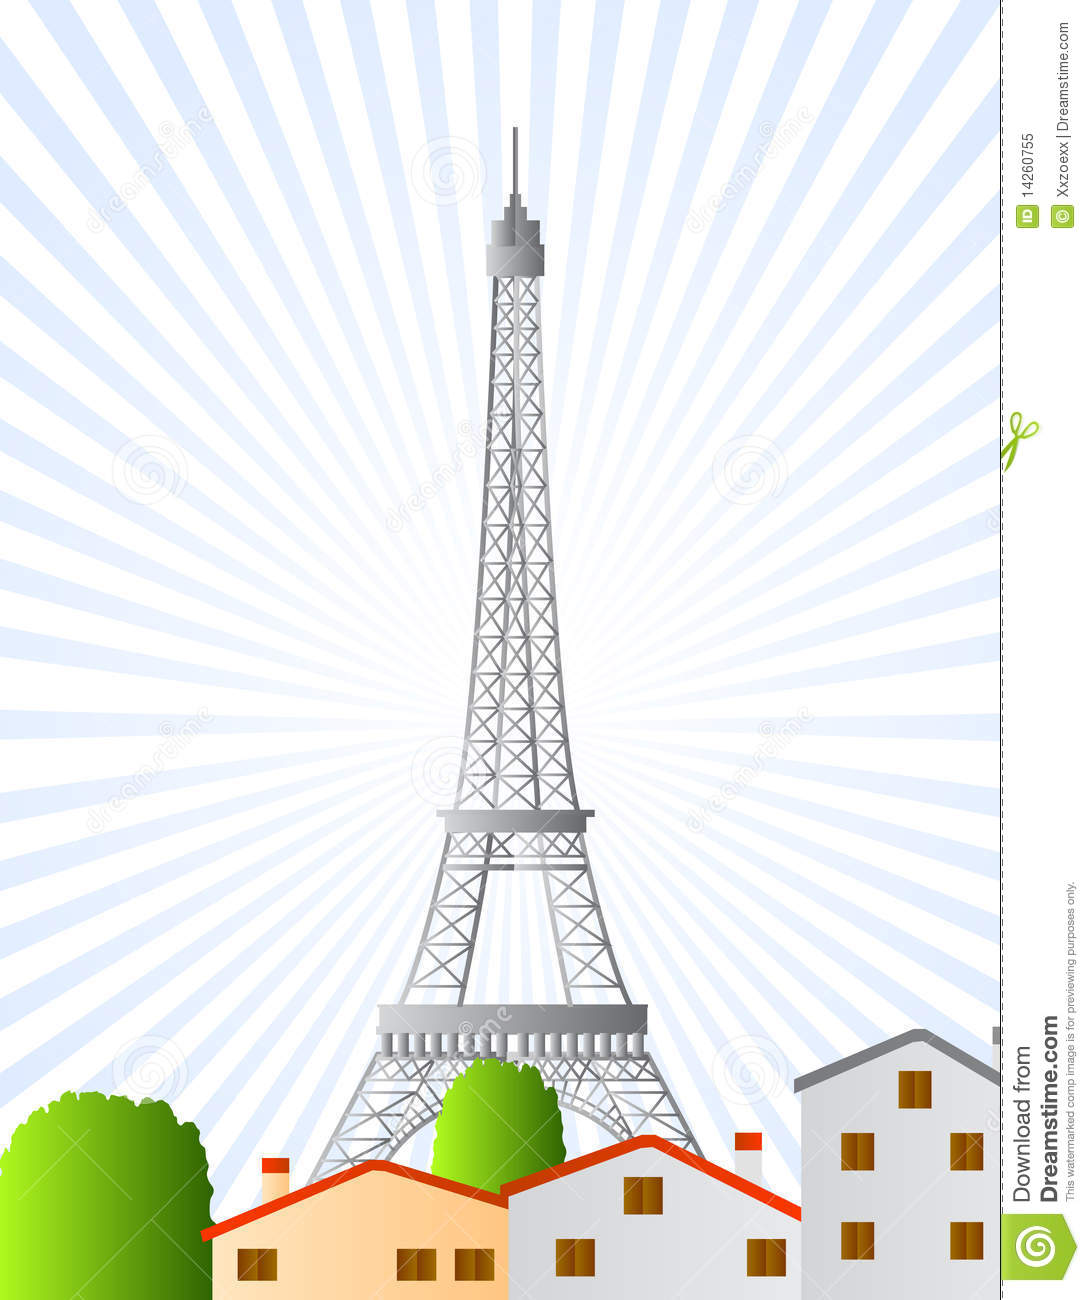 Illustrated Eiffel Tower In Paris With Urban View Of Houses And Trees